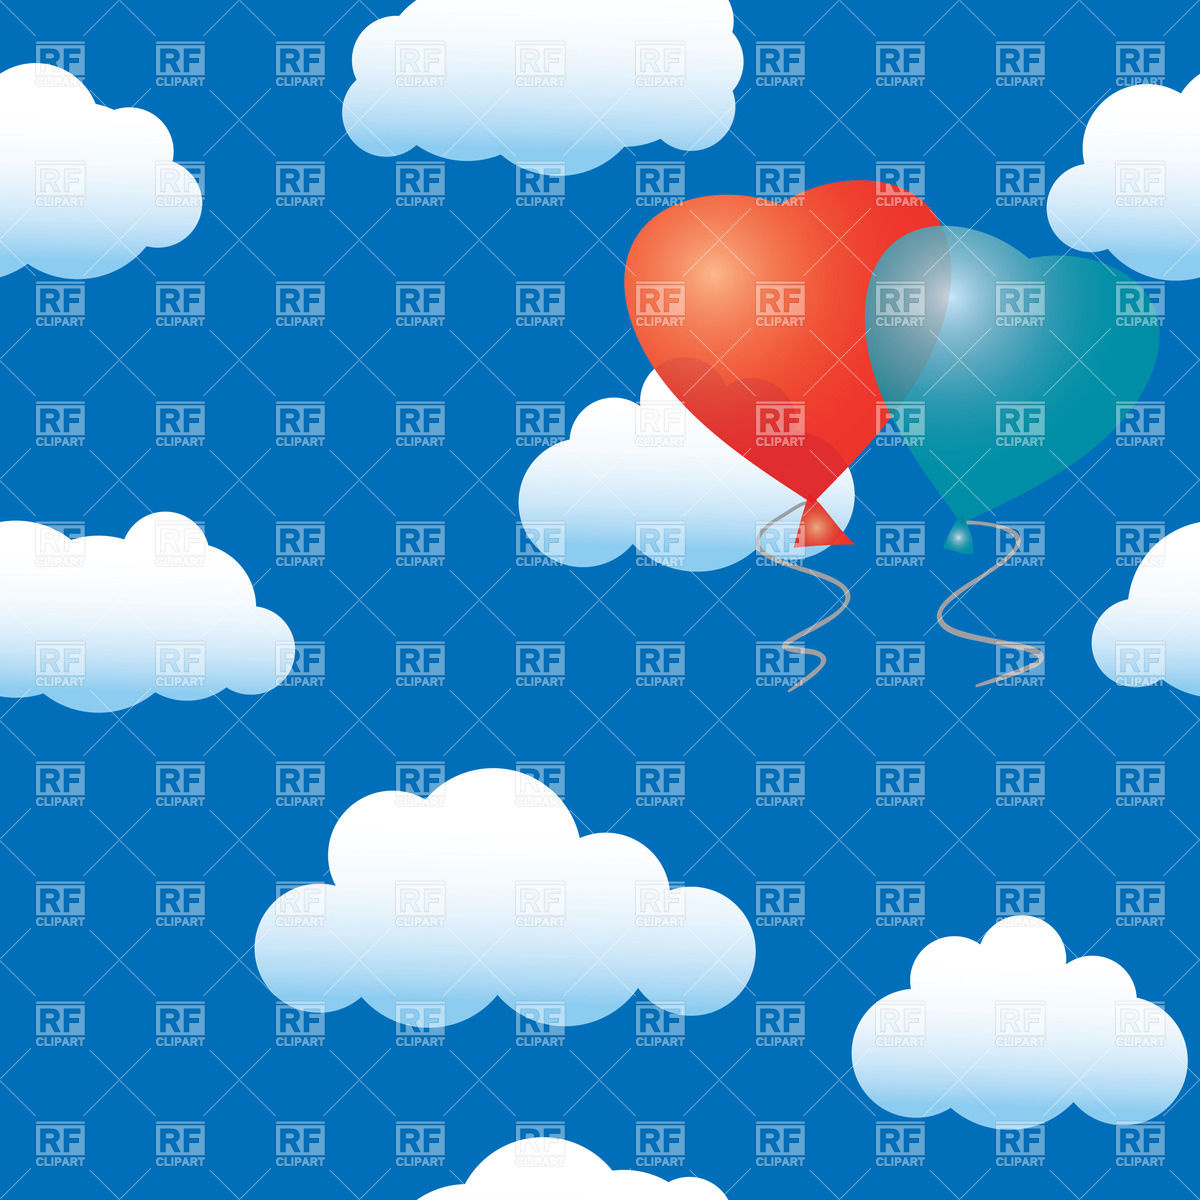 Heart Shaped Balloons In The Sky Backgrounds Textures Abstract